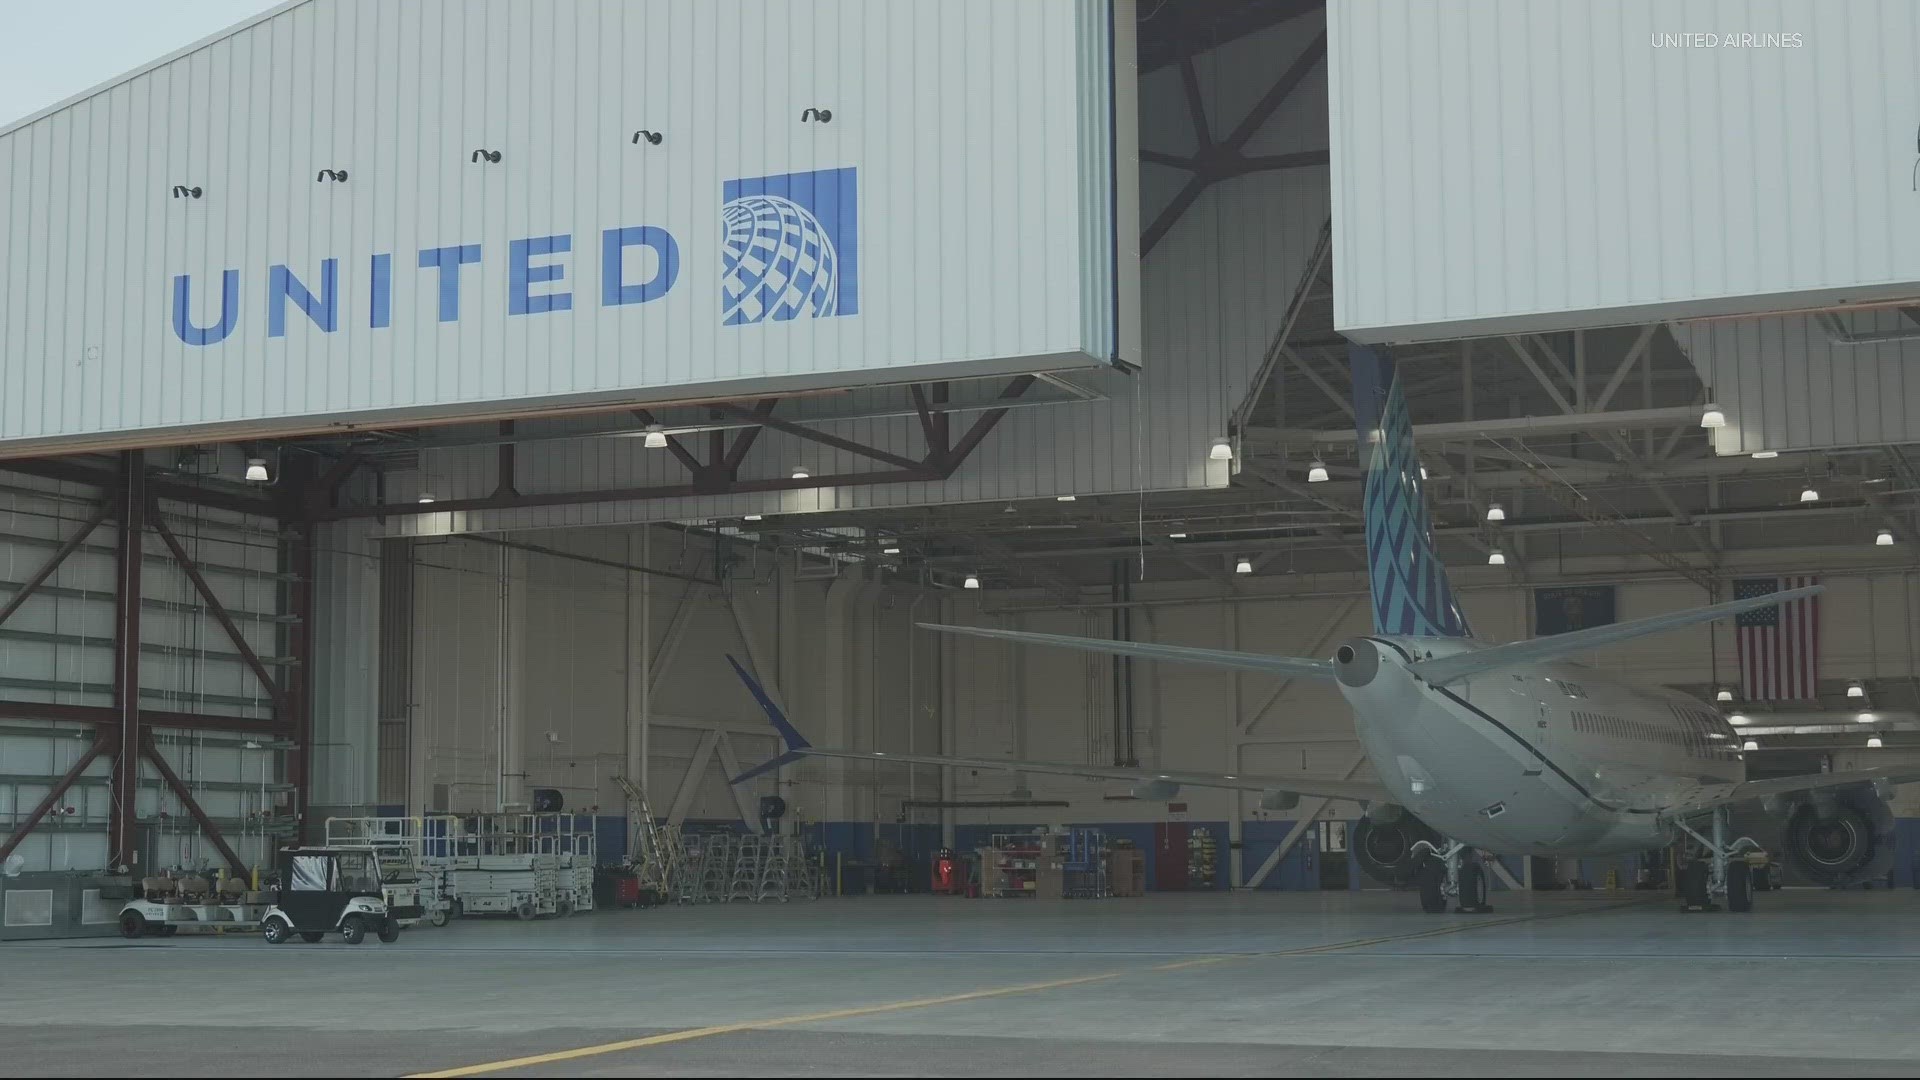 The airline says this will allow it to perform more "elaborate maintenance work."